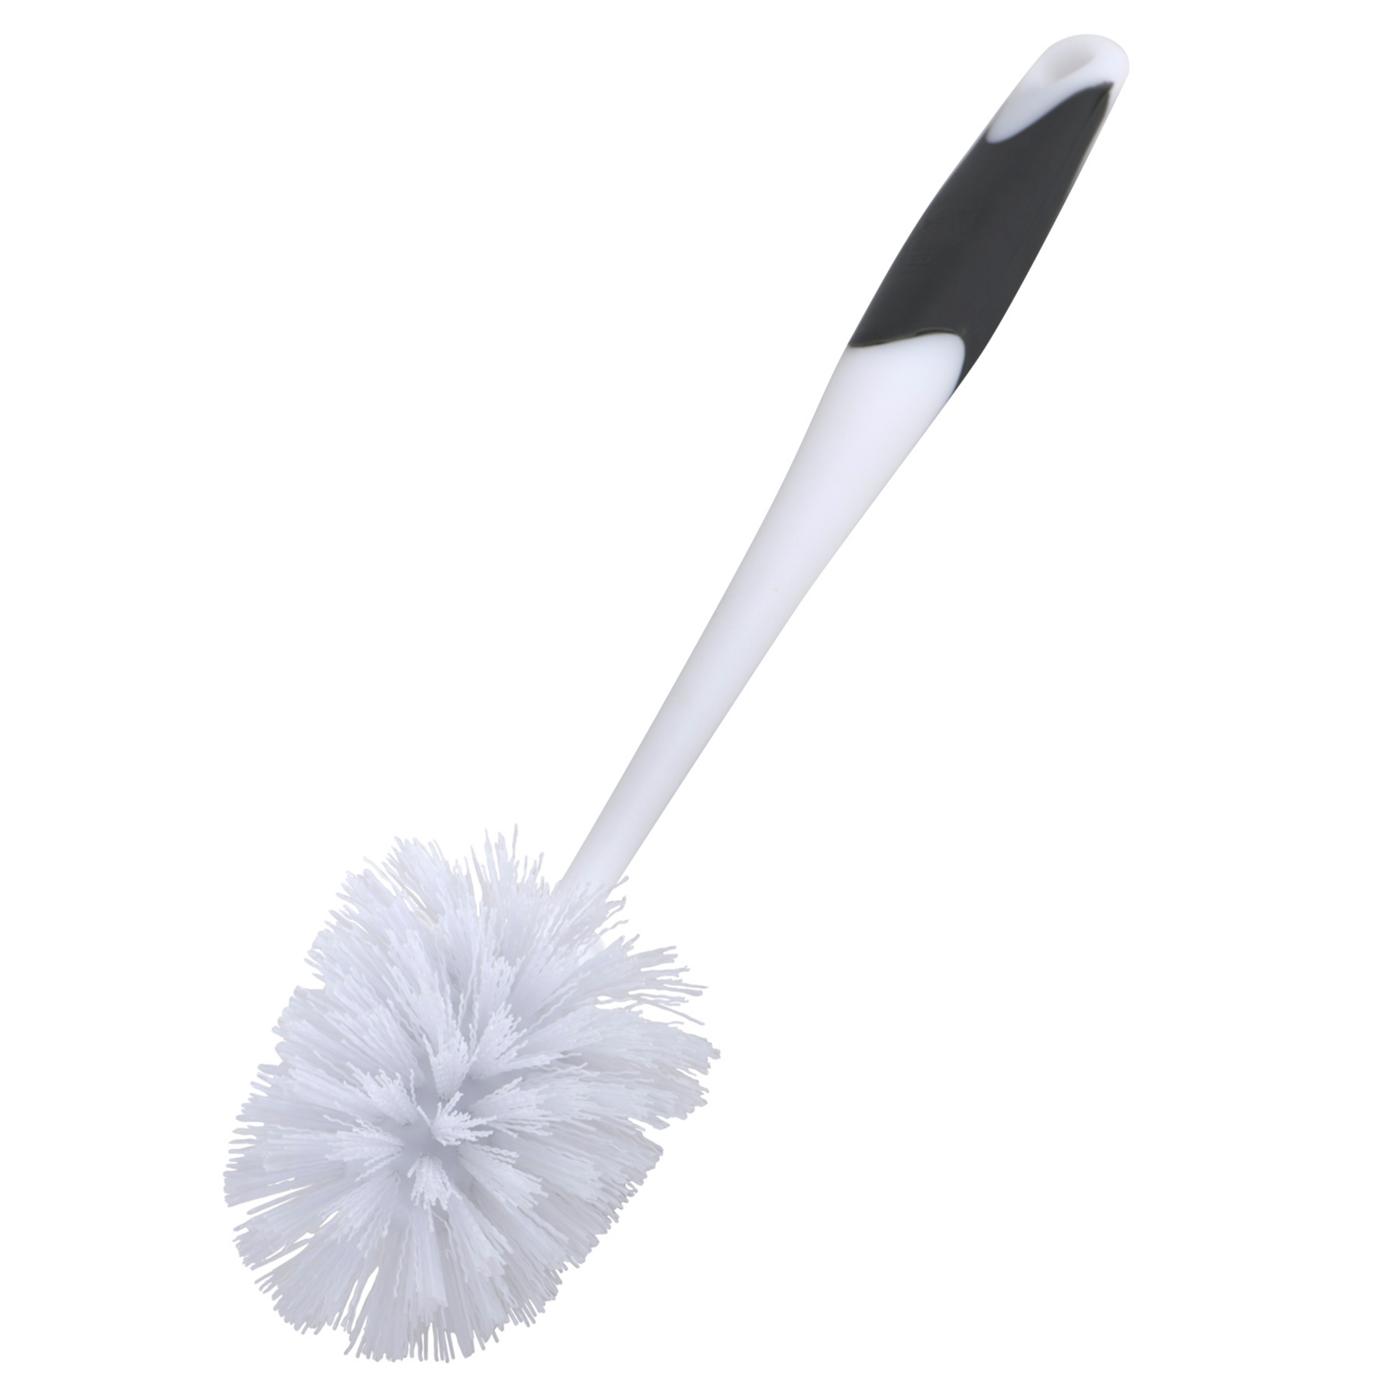 Clorox Toilet Bowl Brush with Comfort Grip; image 2 of 2